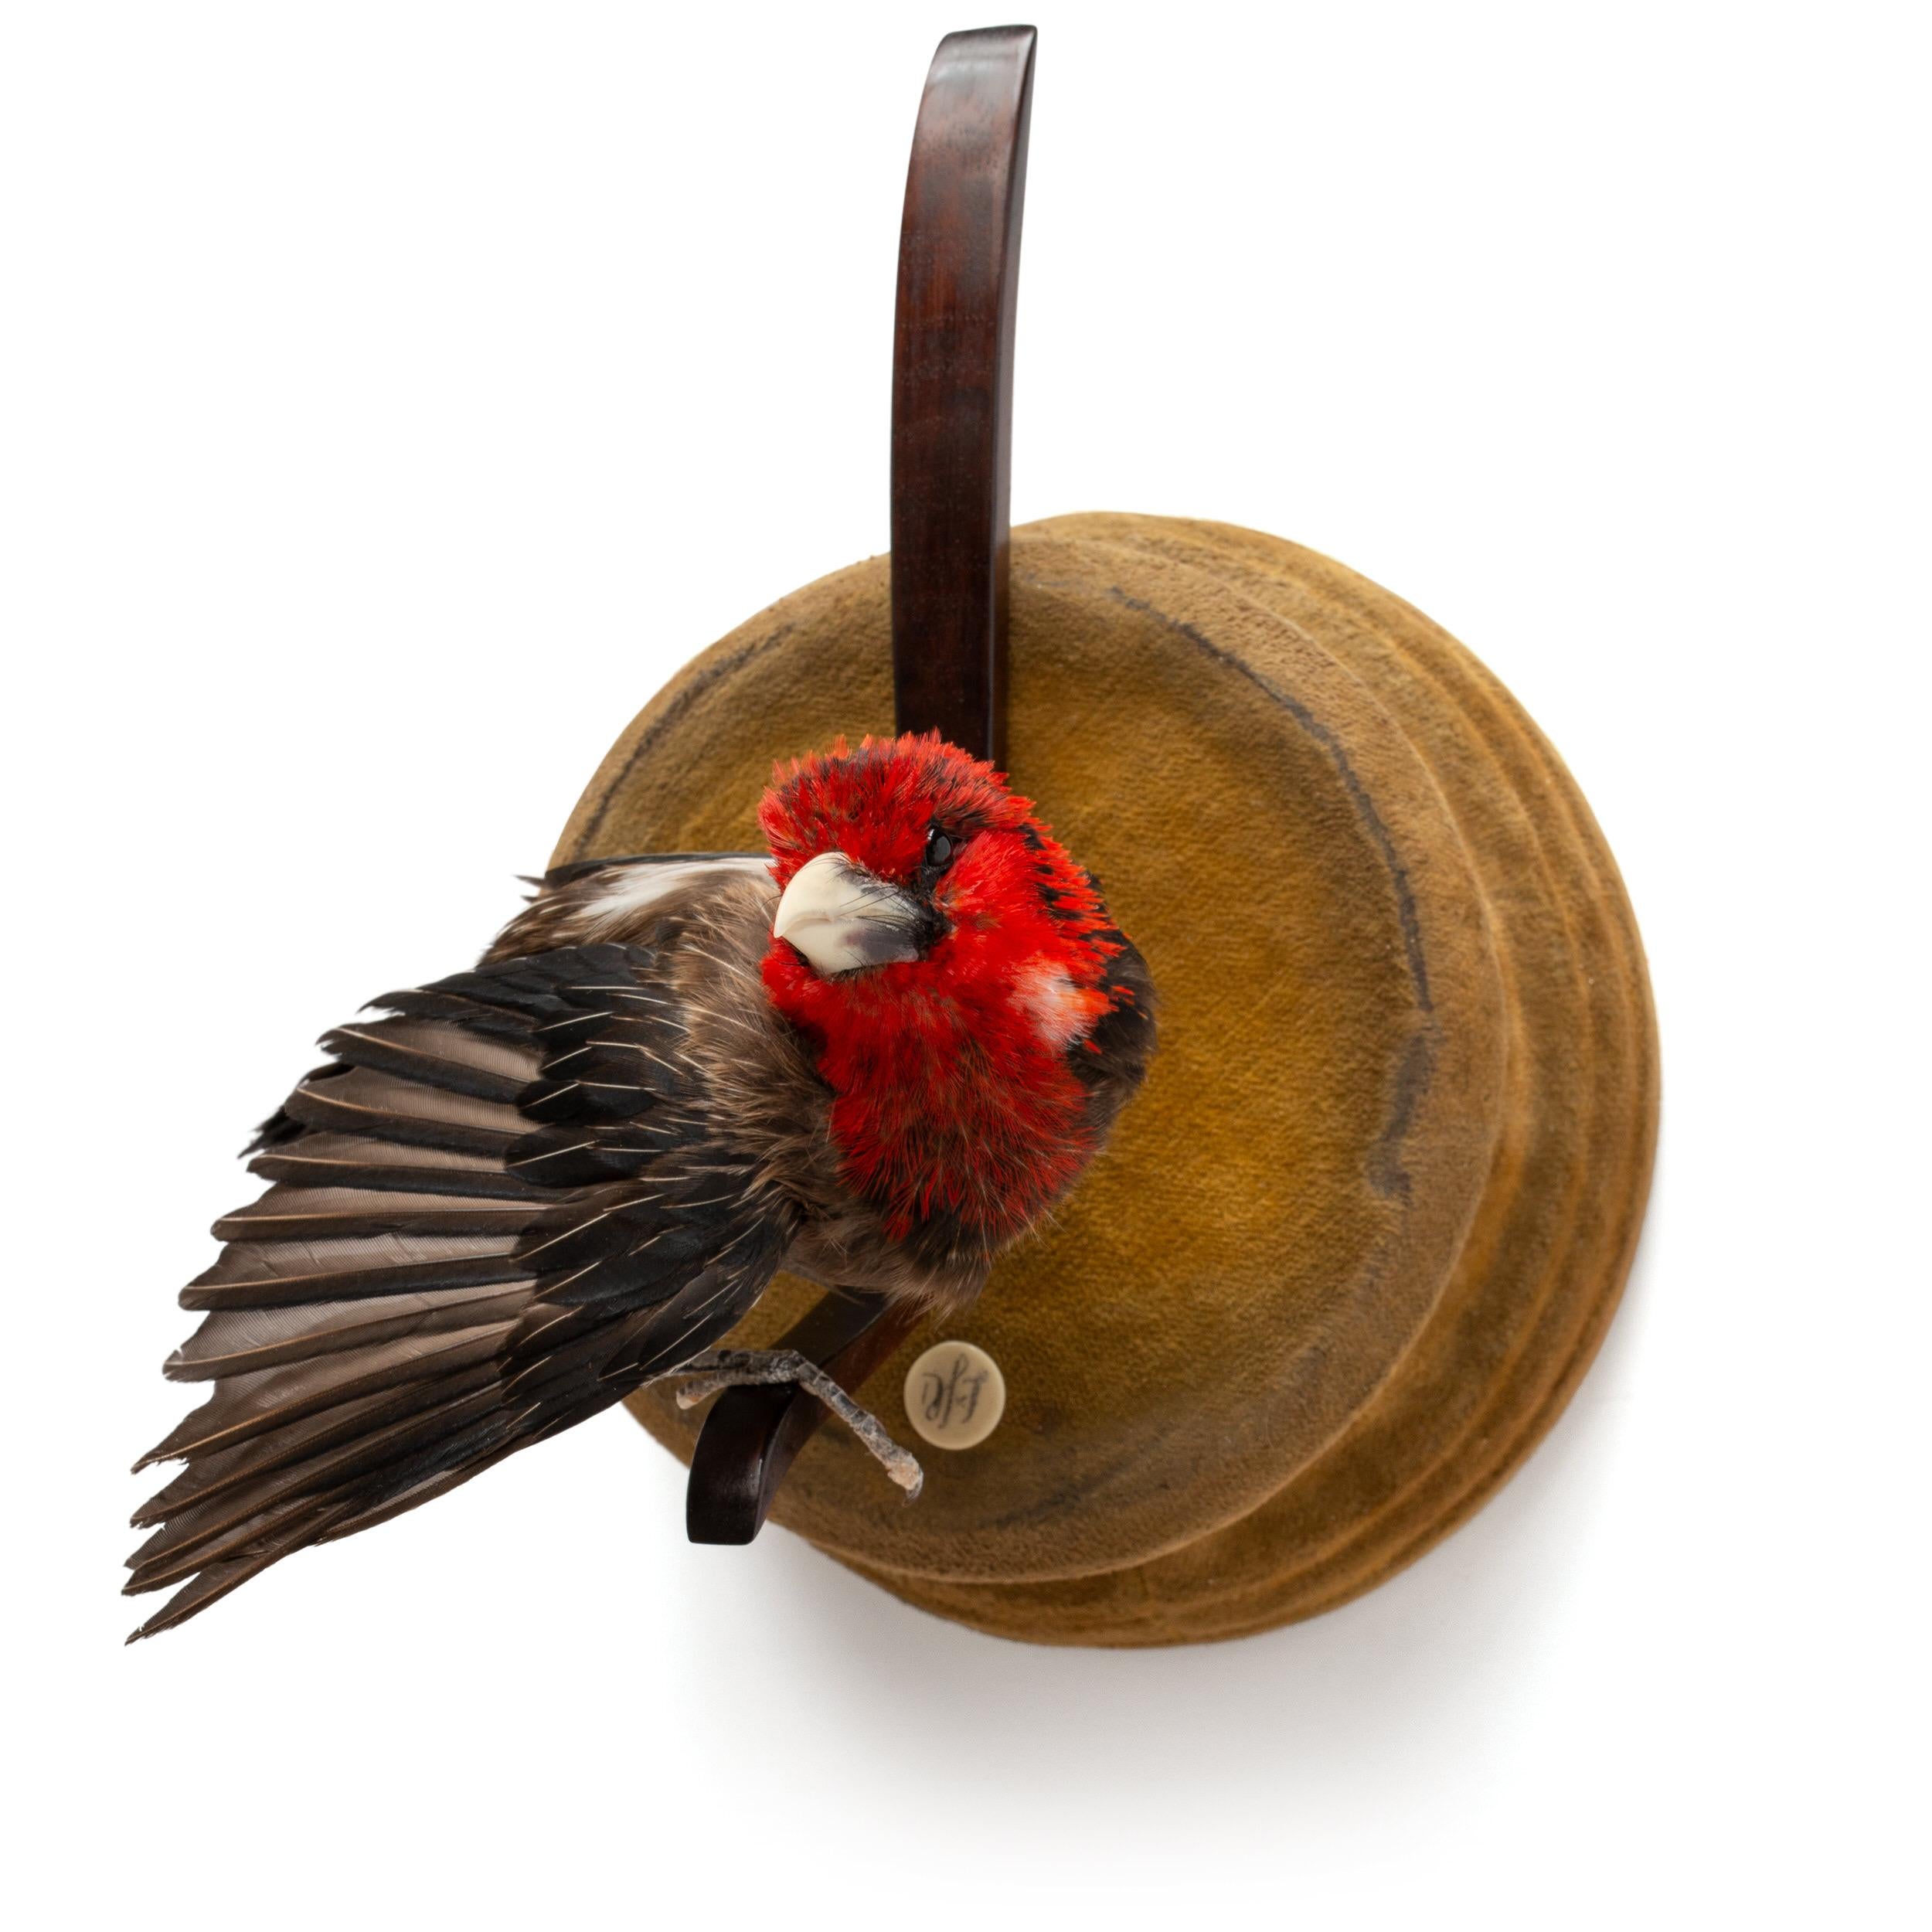 ‘Stills from a Courtship Dance’ is a series of Fine Taxidermy works with smaller exotic (rare) birds. Sinke and van Tongeren created this series of birds as if they suddenly seemed frozen during the lascivious work put into their mating